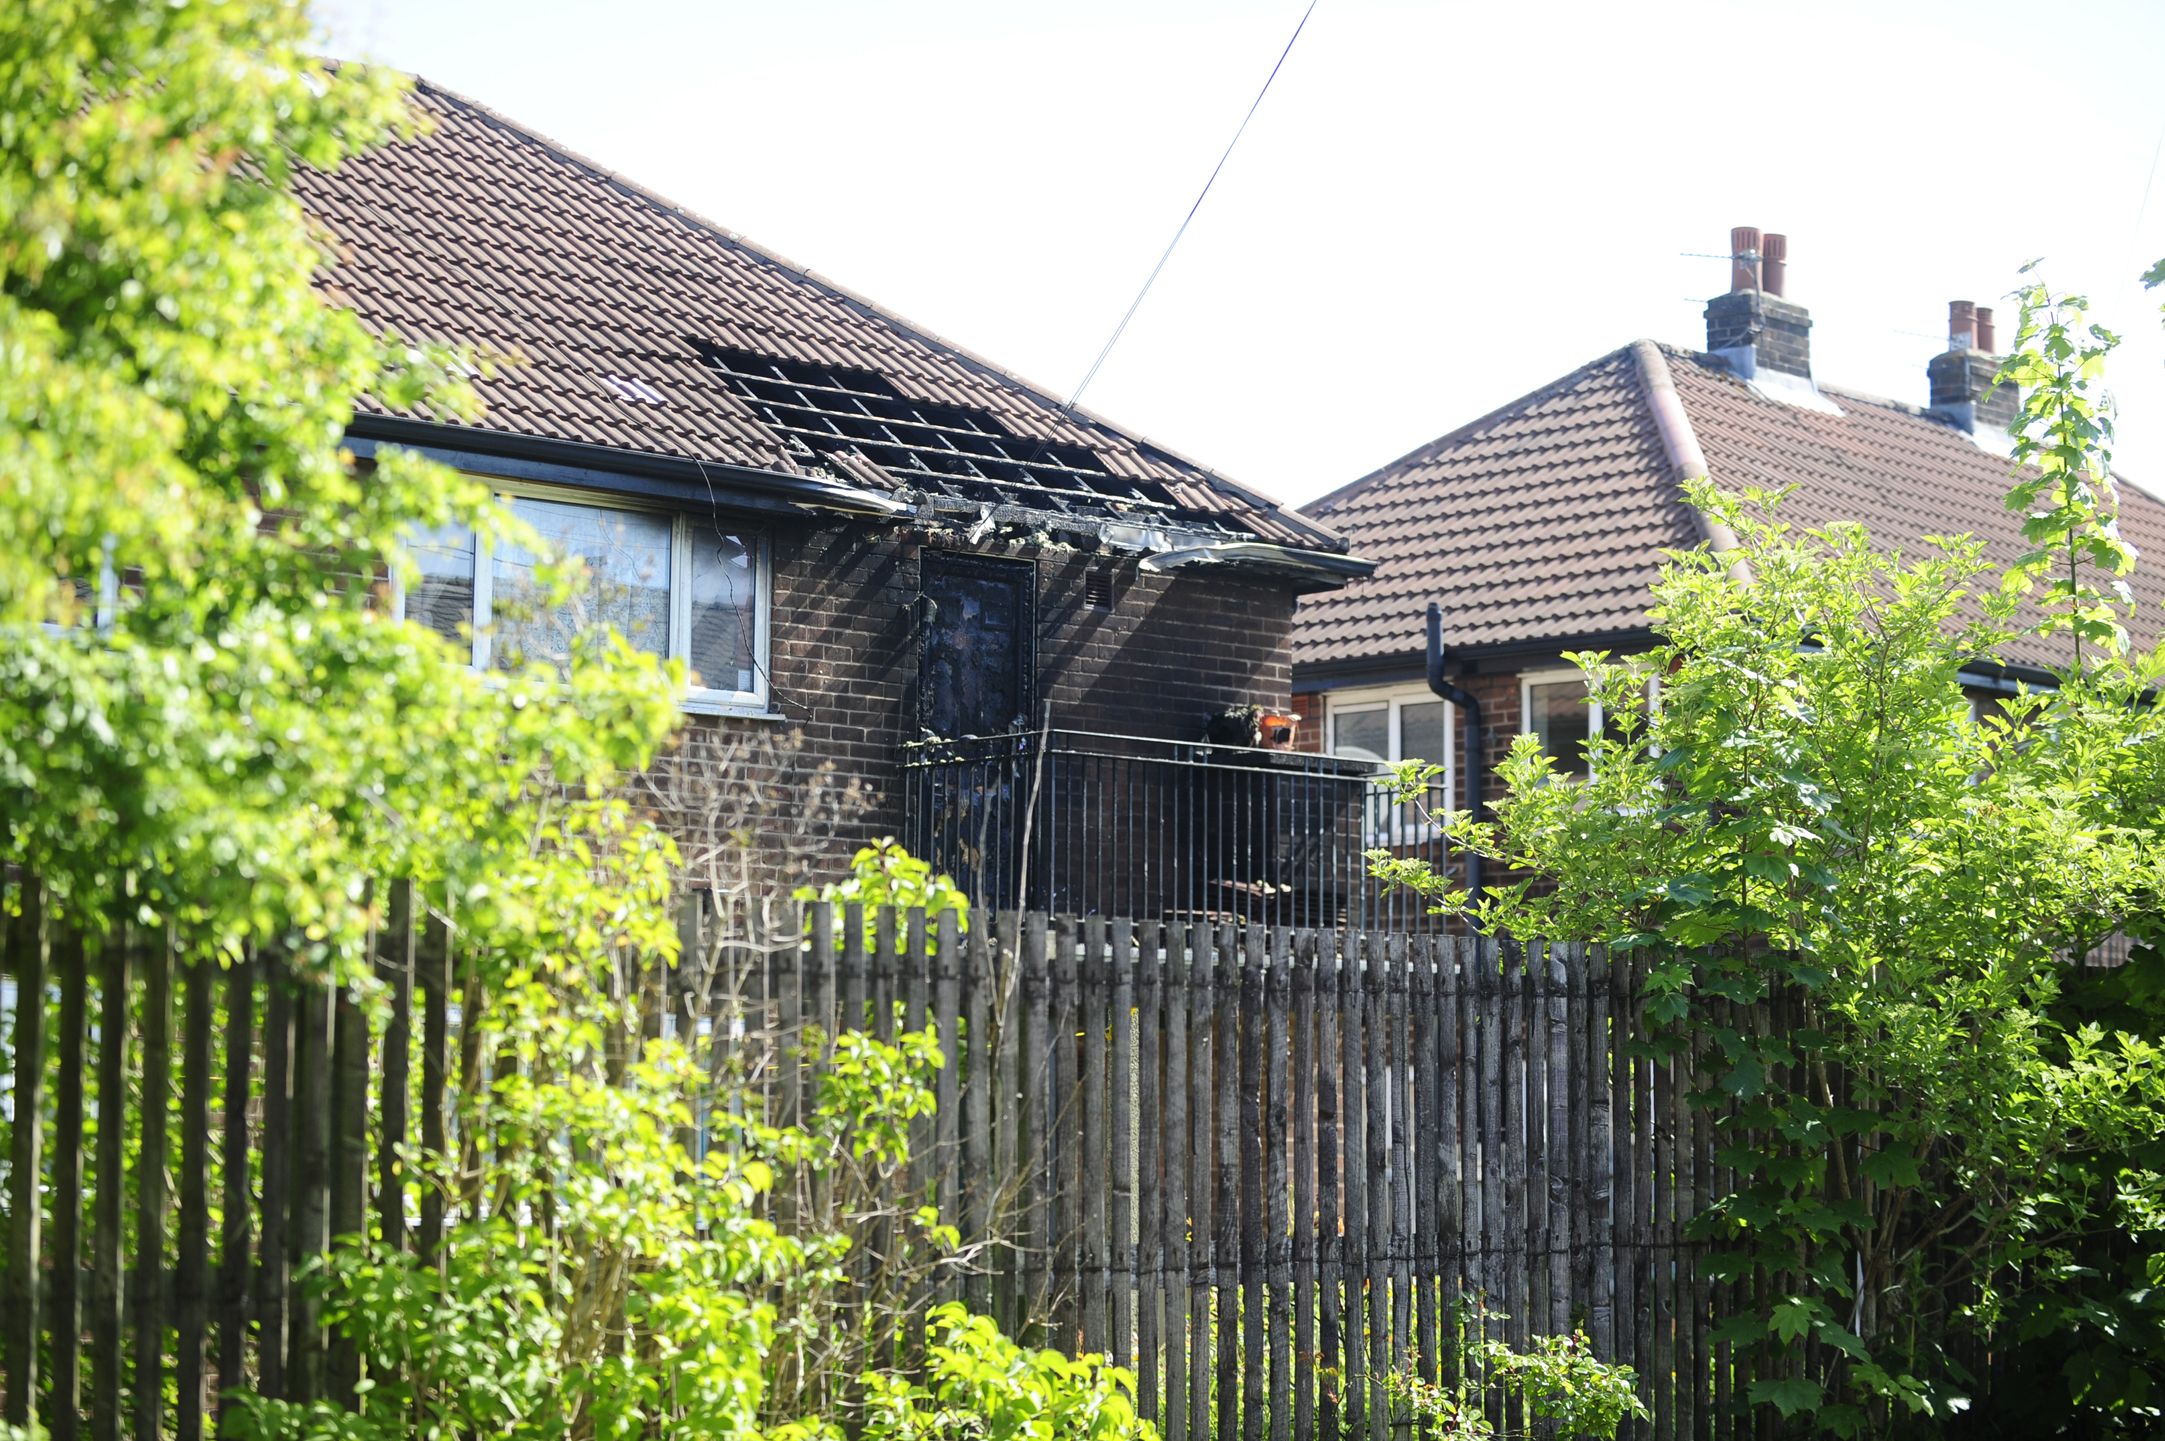 UPDATED: Woman taken to hospital with burns after pouring petrol onto log burner on balcony